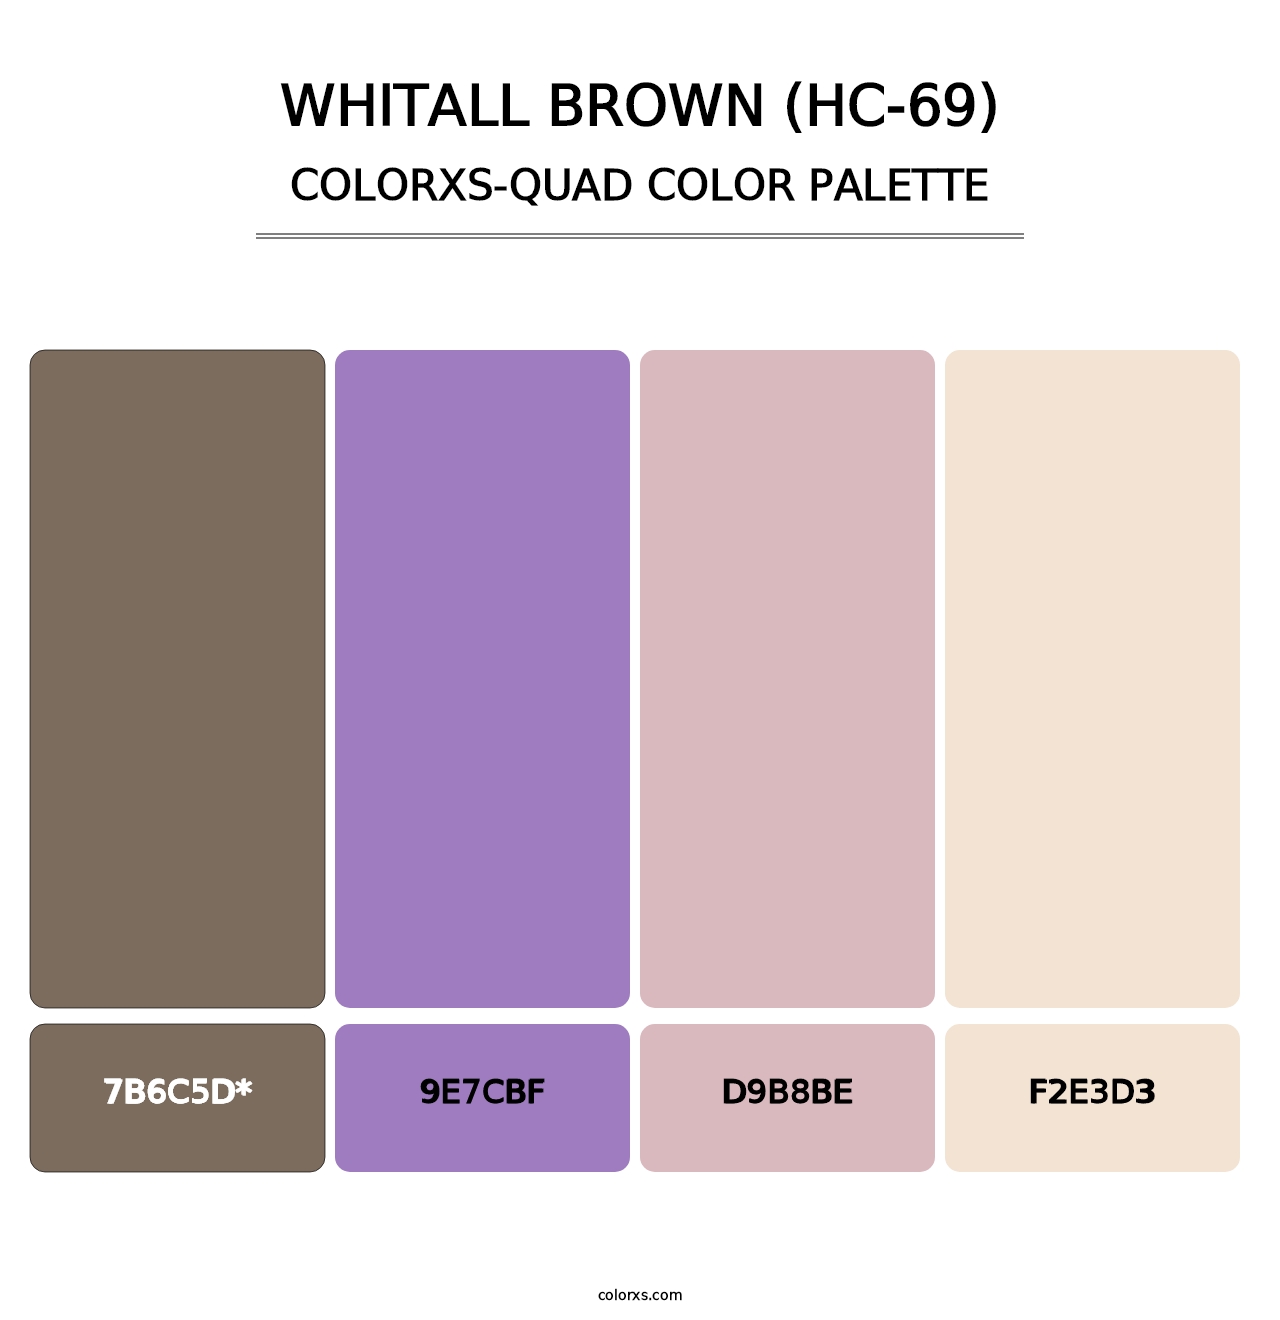 Whitall Brown (HC-69) - Colorxs Quad Palette